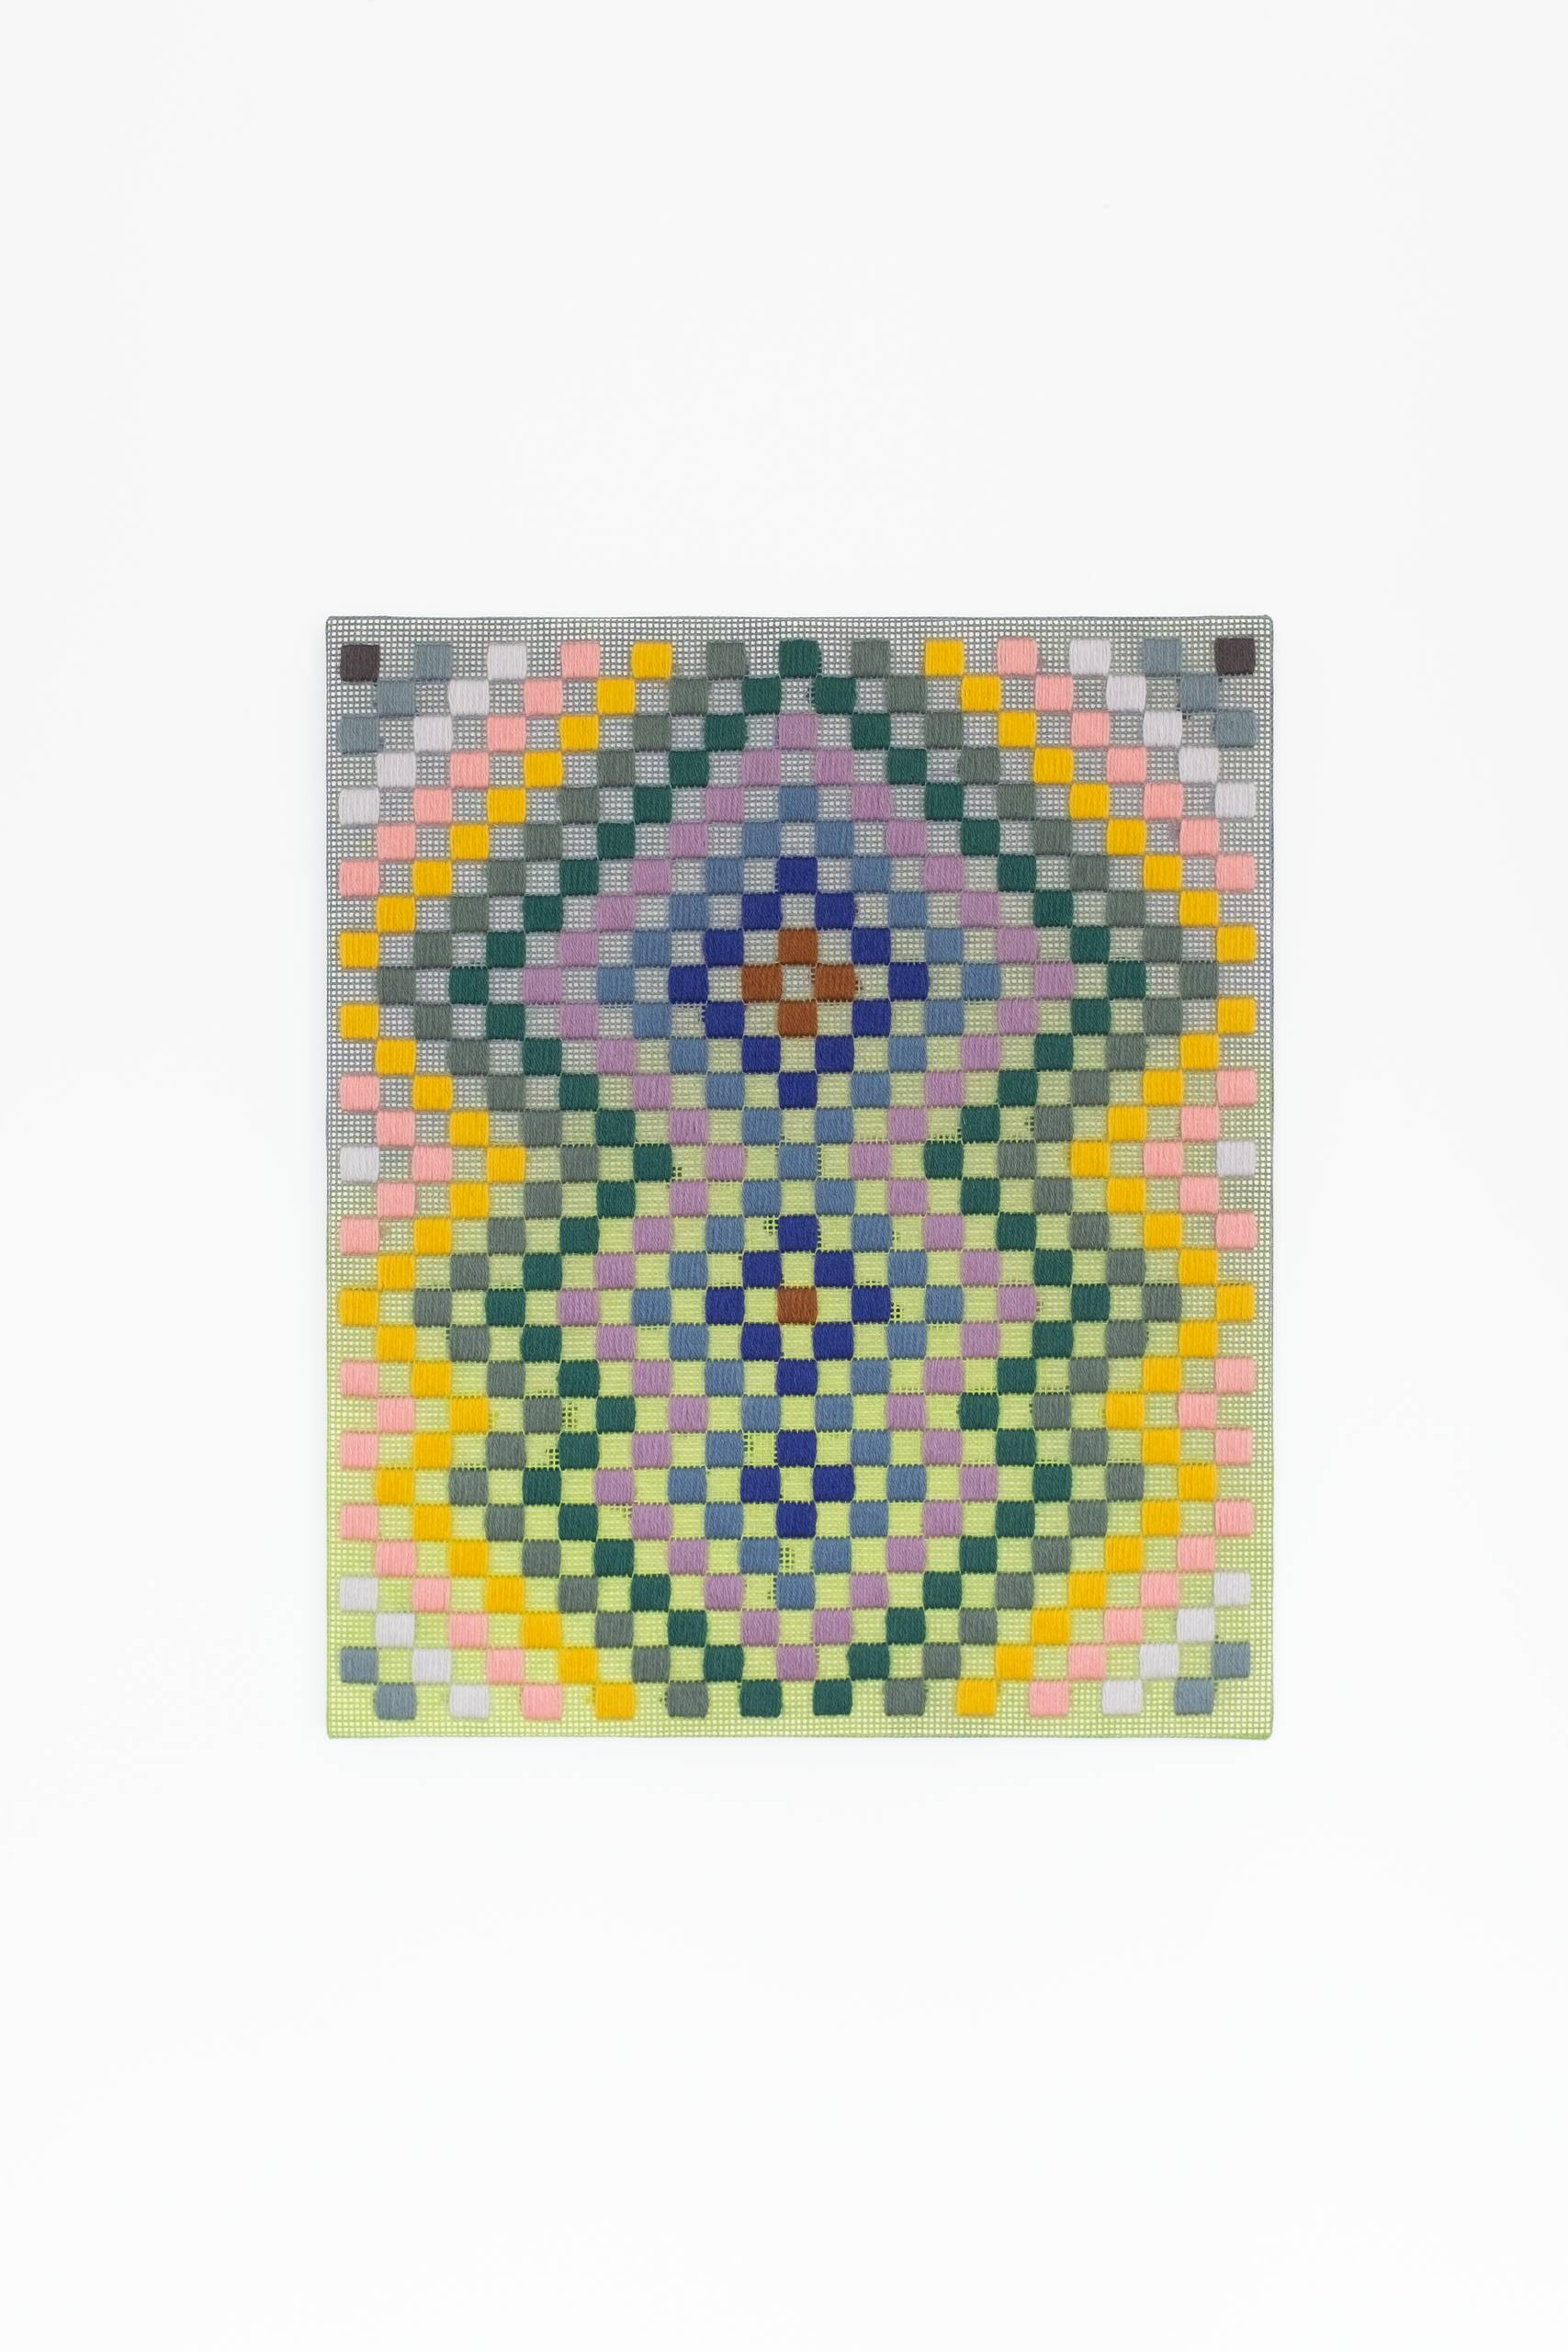 Punch card -- Patchwork [grey], Hand-embroidered wool yarn and acrylic paint on canvas, 2022